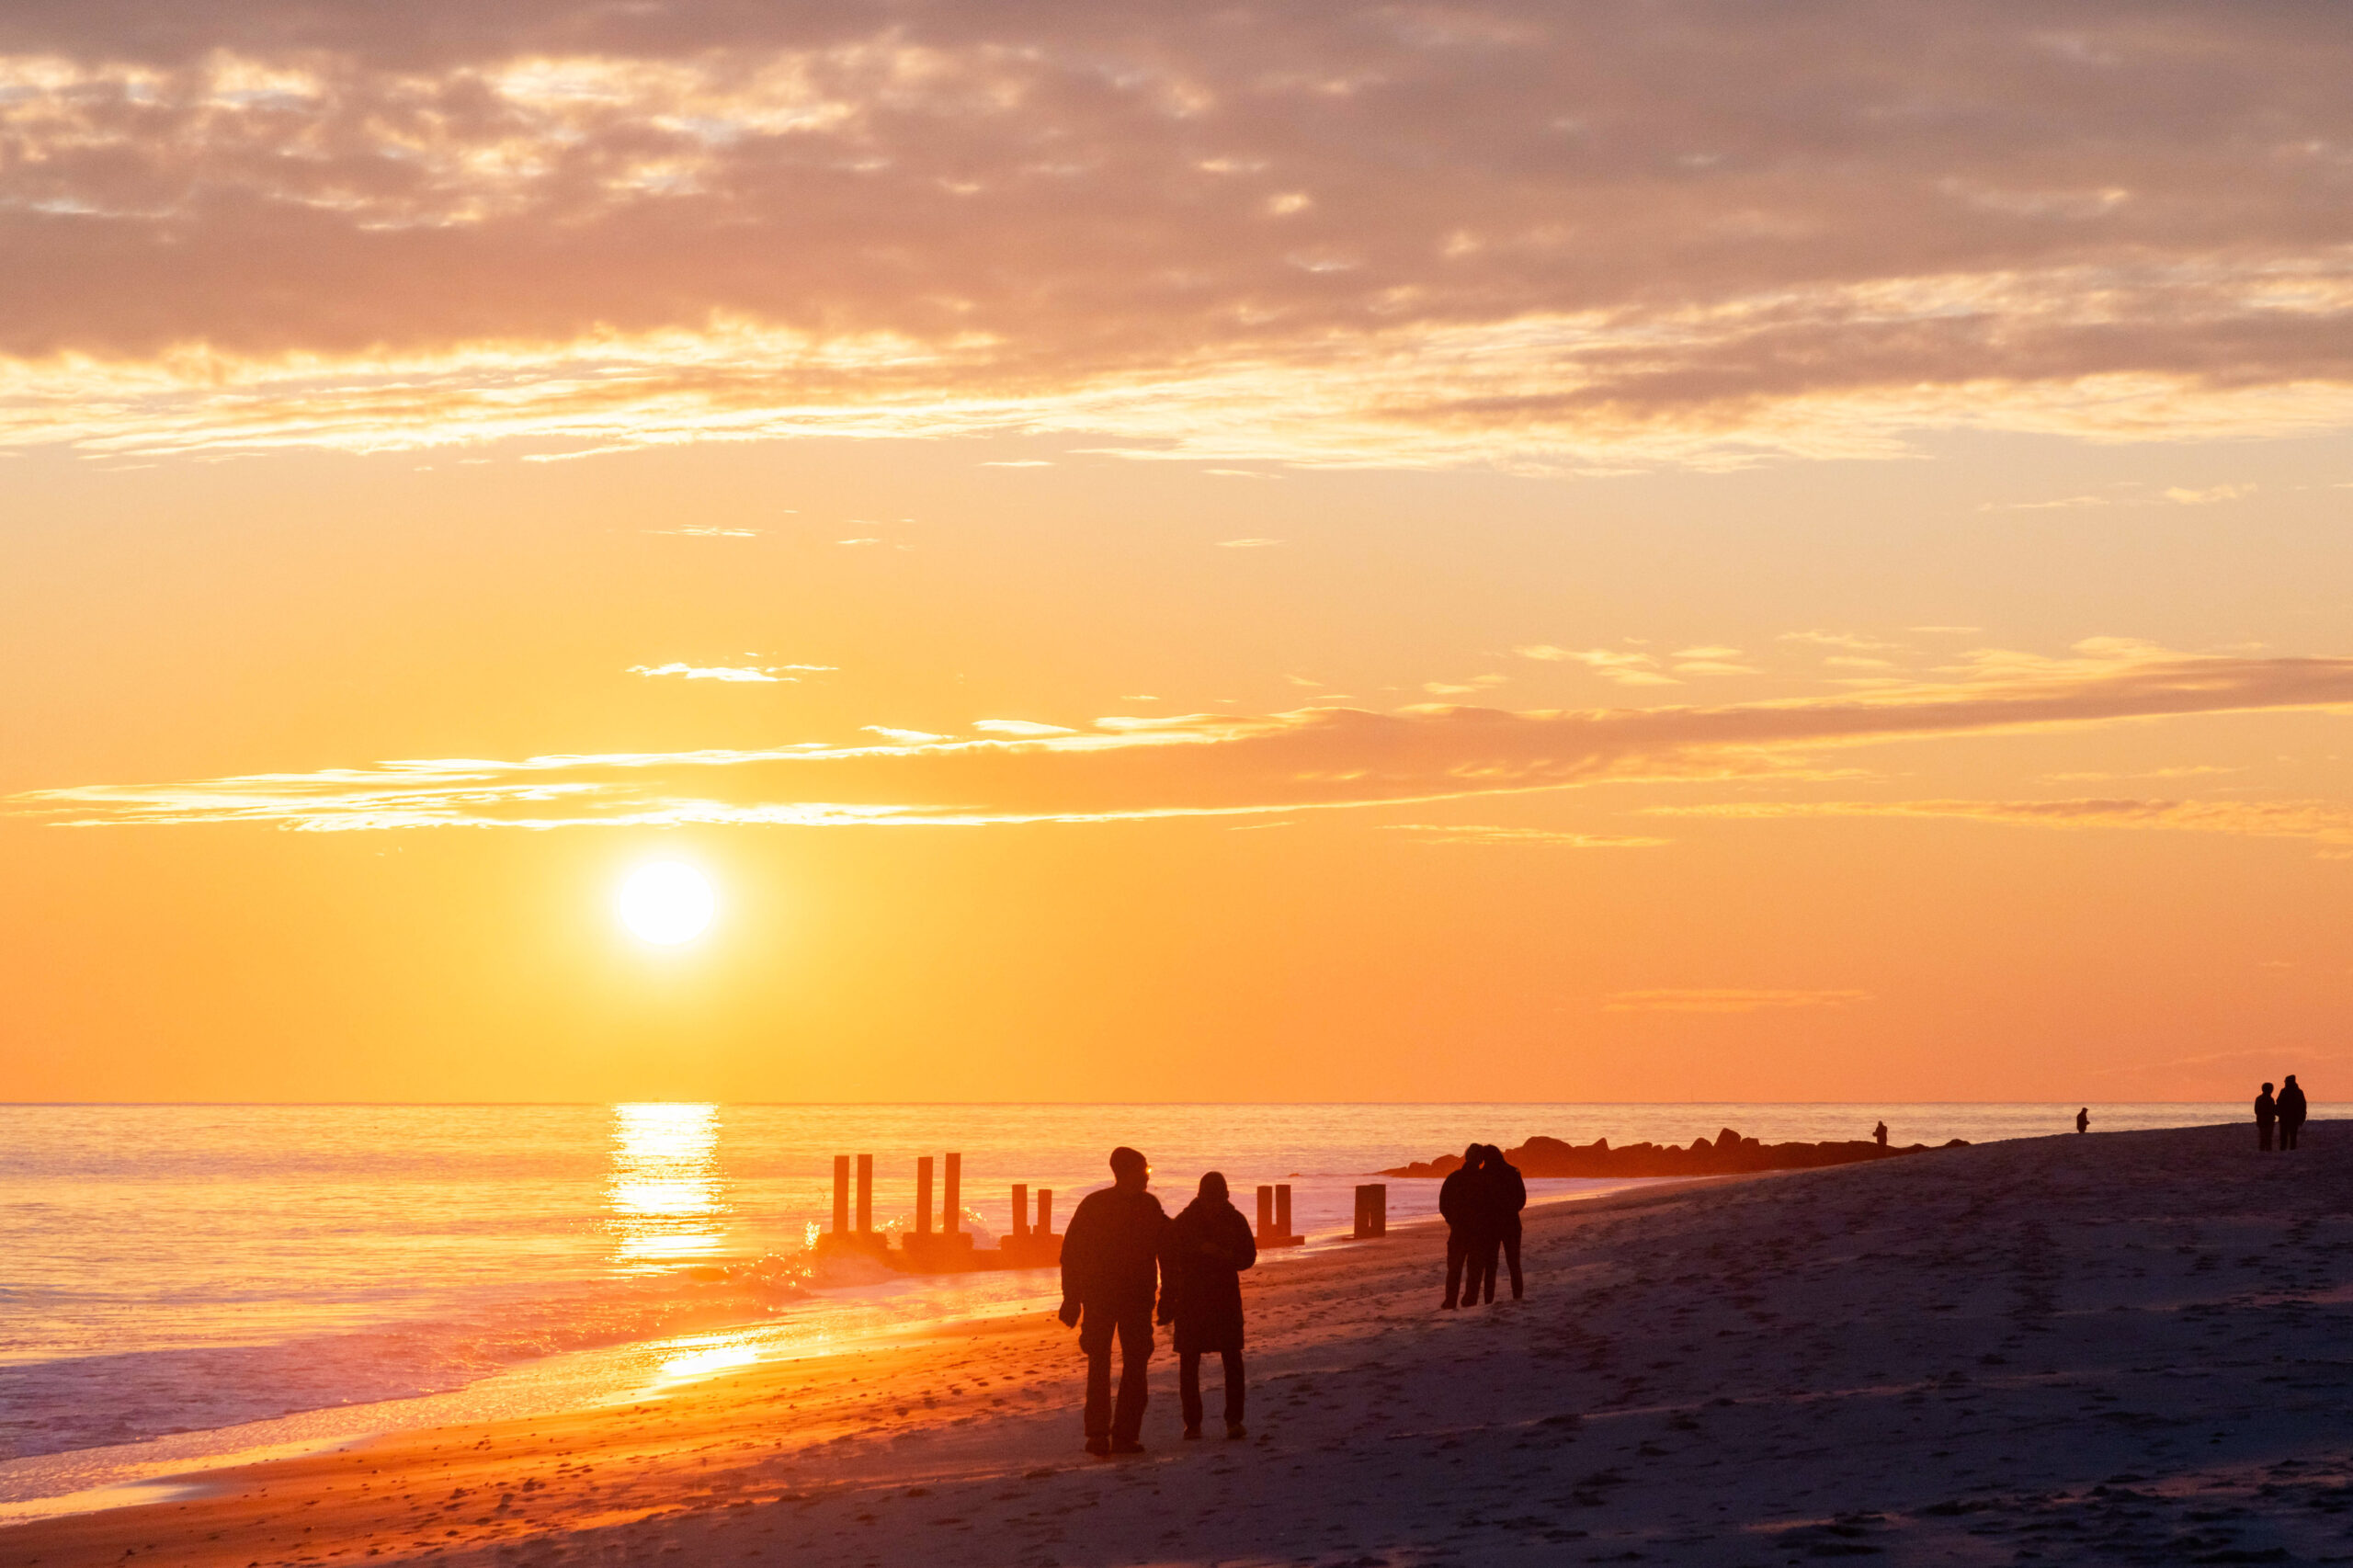 Couples walking on the beach with a few thin clouds at the sky and the setting sun shining brightly